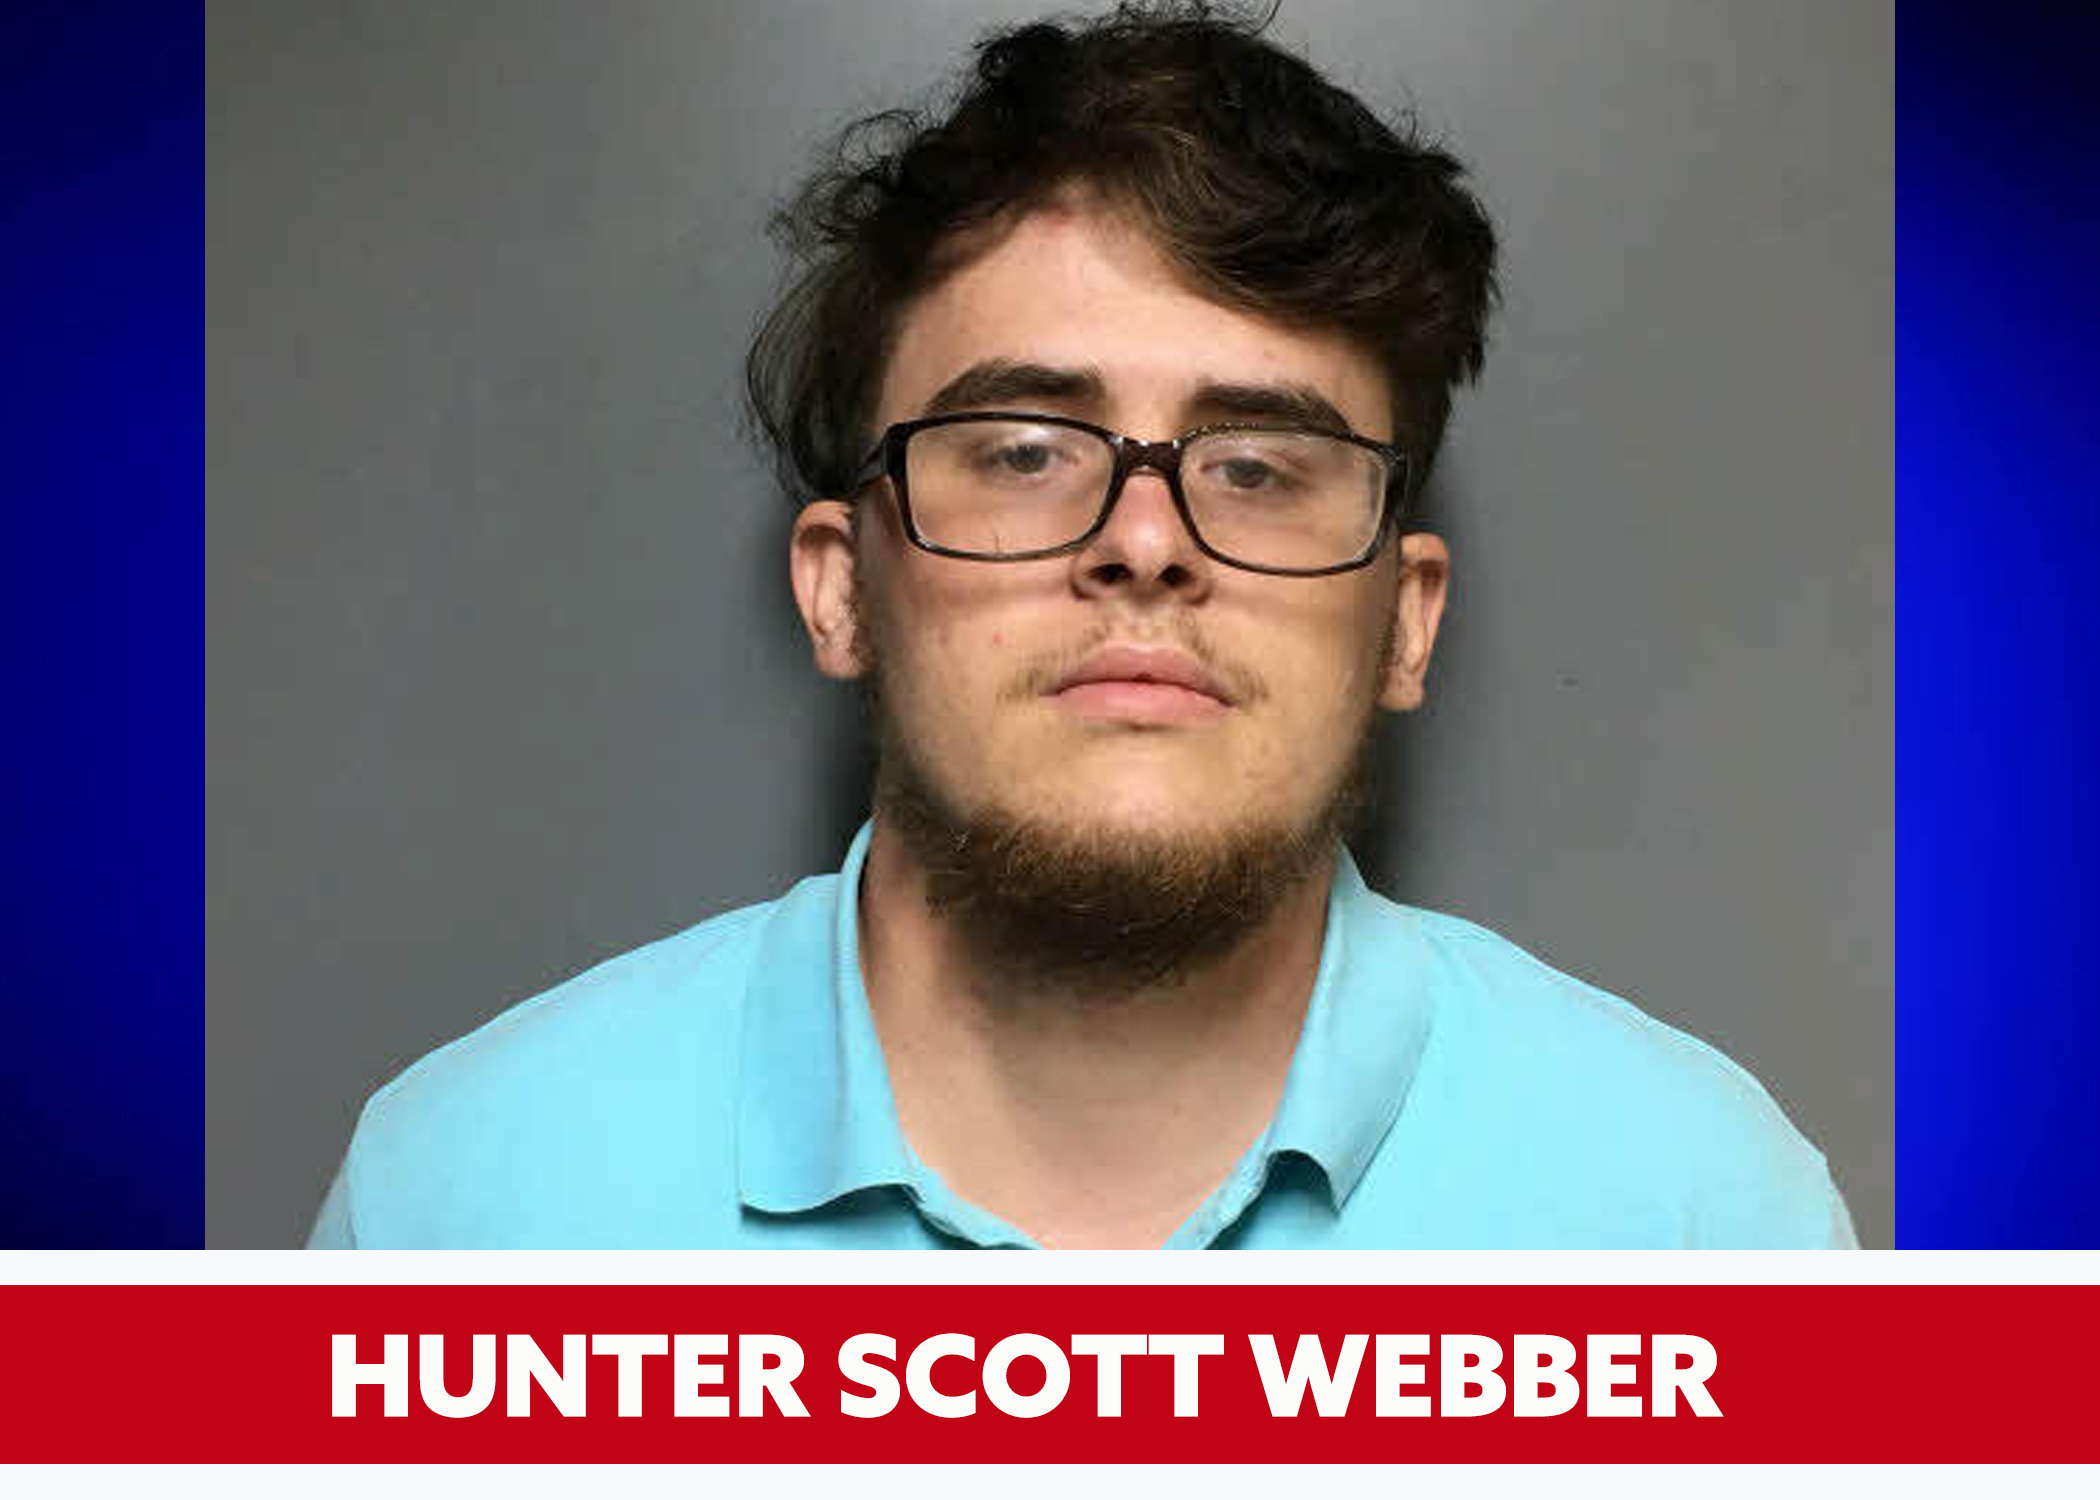 Man arrested in St. Clair County on 20 counts of dissemination of child pornography